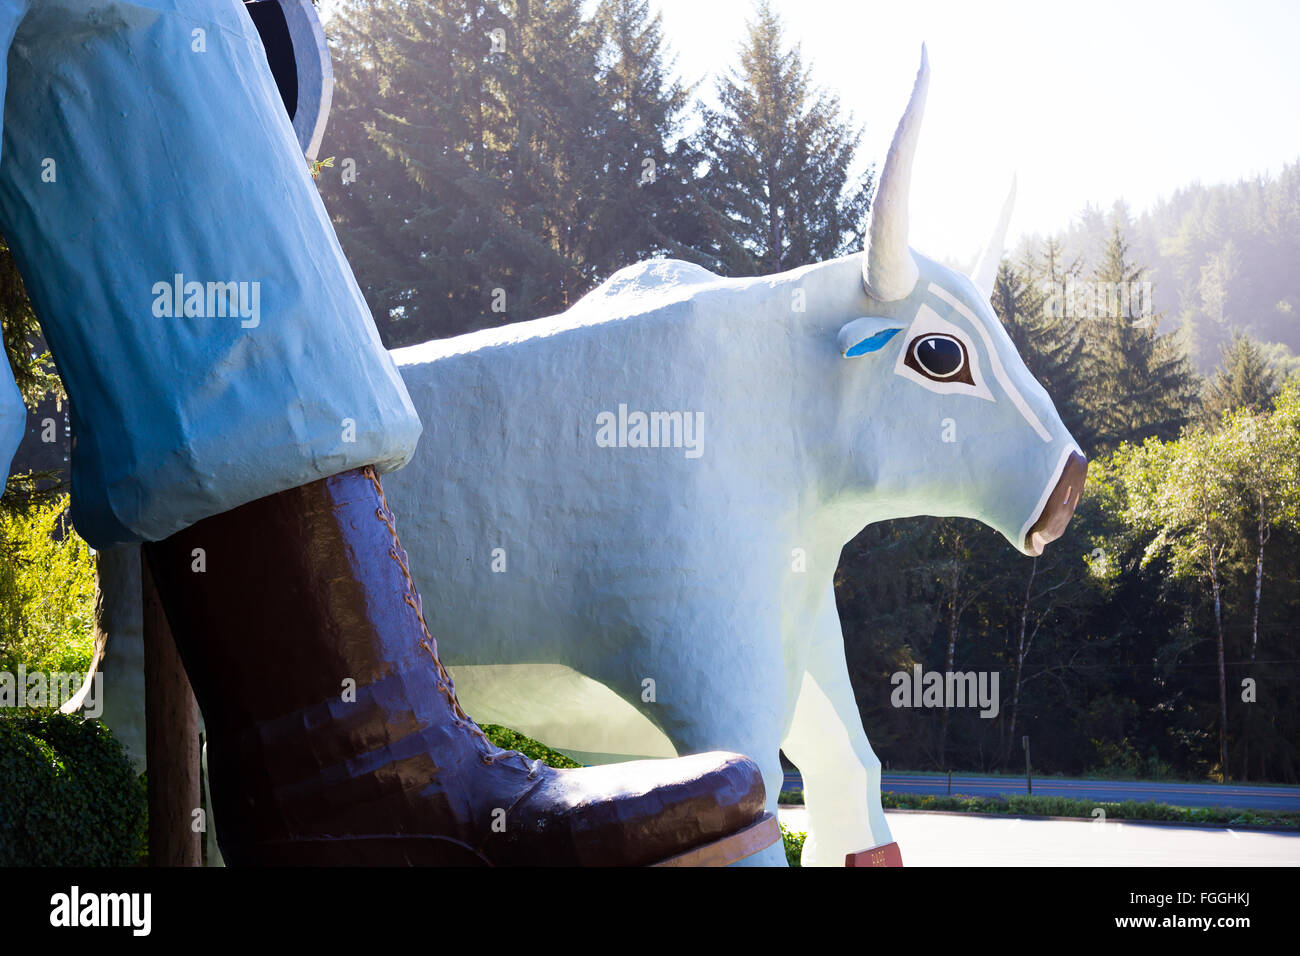 Famous Paul Bunyan statue in the Redwoods National Park in California. Stock Photo